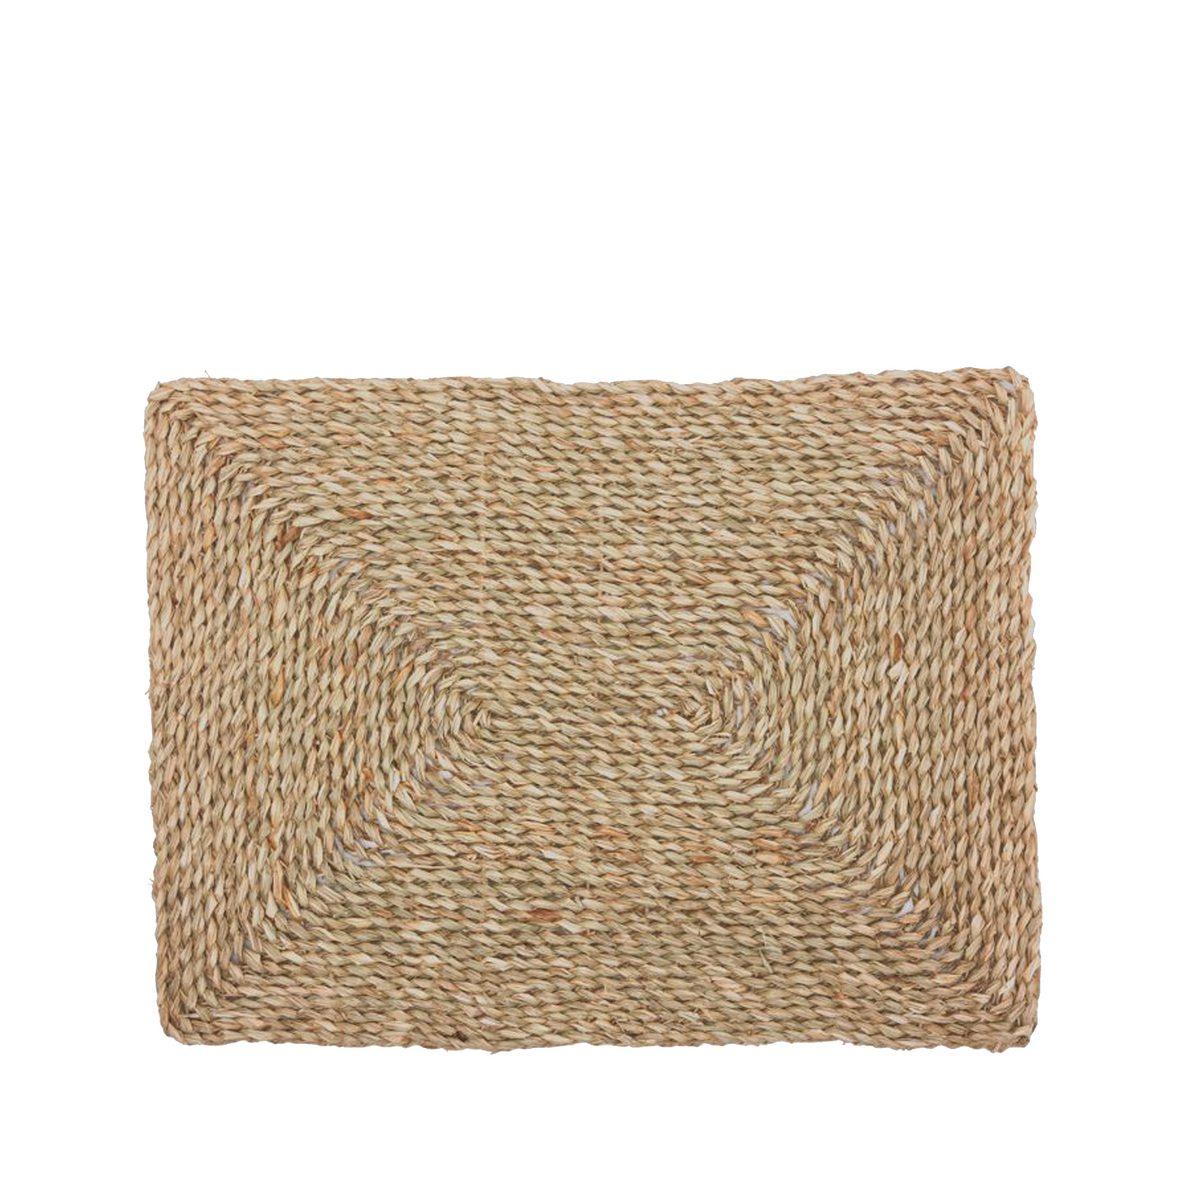 Set of 4 Rectangular Aged Seagrass Placemat